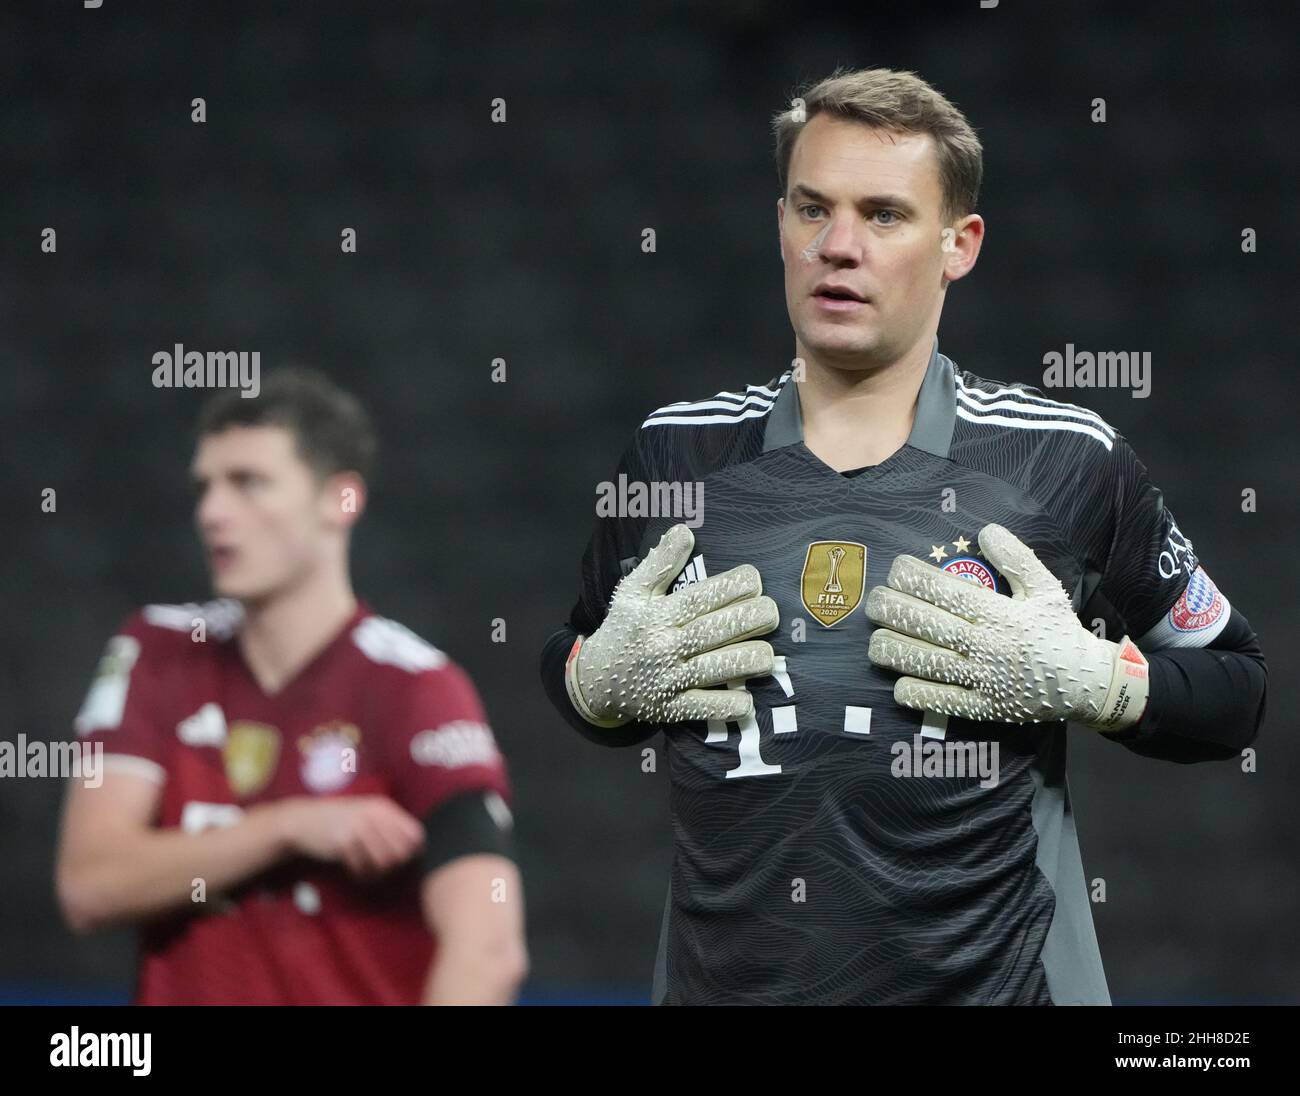 Berlin, Germany. 23rd Jan, 2022. Soccer: Bundesliga, Hertha BSC - Bayern Munich, Matchday 20 at the Olympiastadion. Munich goalkeeper Manuel Neuer taps his chest with both hands. Credit: Soeren Stache/dpa-Zentralbild/dpa - IMPORTANT NOTE: In accordance with the requirements of the DFL Deutsche Fußball Liga and the DFB Deutscher Fußball-Bund, it is prohibited to use or have used photographs taken in the stadium and/or of the match in the form of sequence pictures and/or video-like photo series./dpa/Alamy Live News Stock Photo